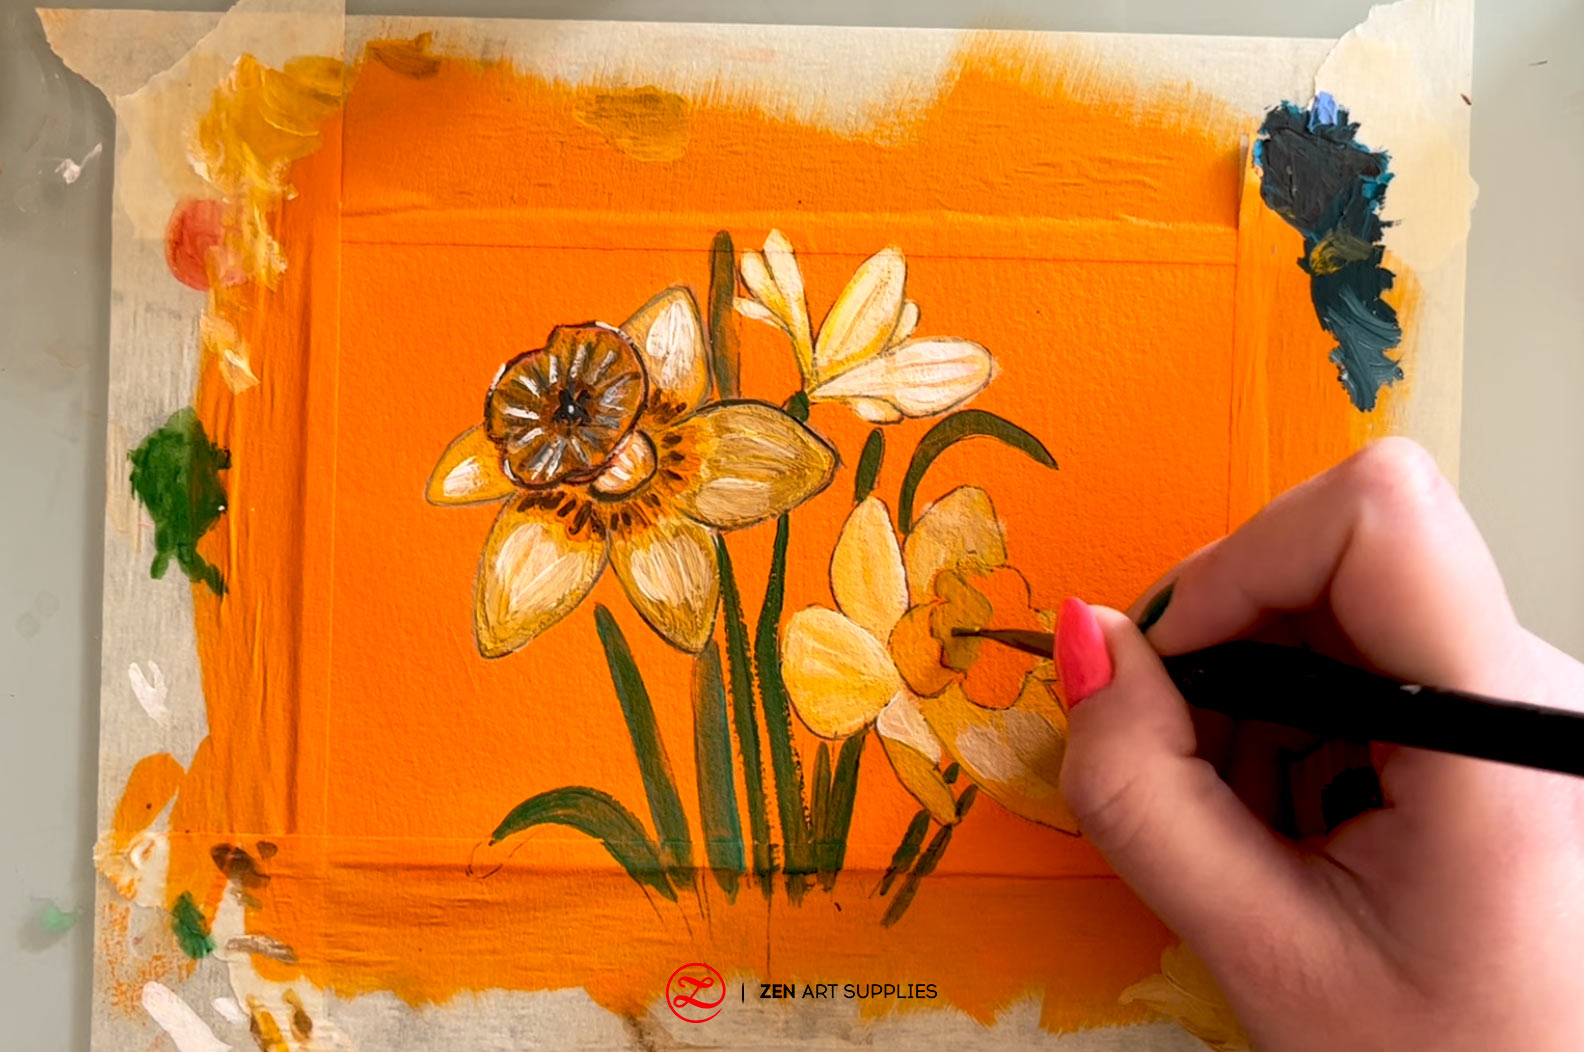 Painting the third flower the same lighter yellow, adding more details to the first, and painting the stems and leaves green.